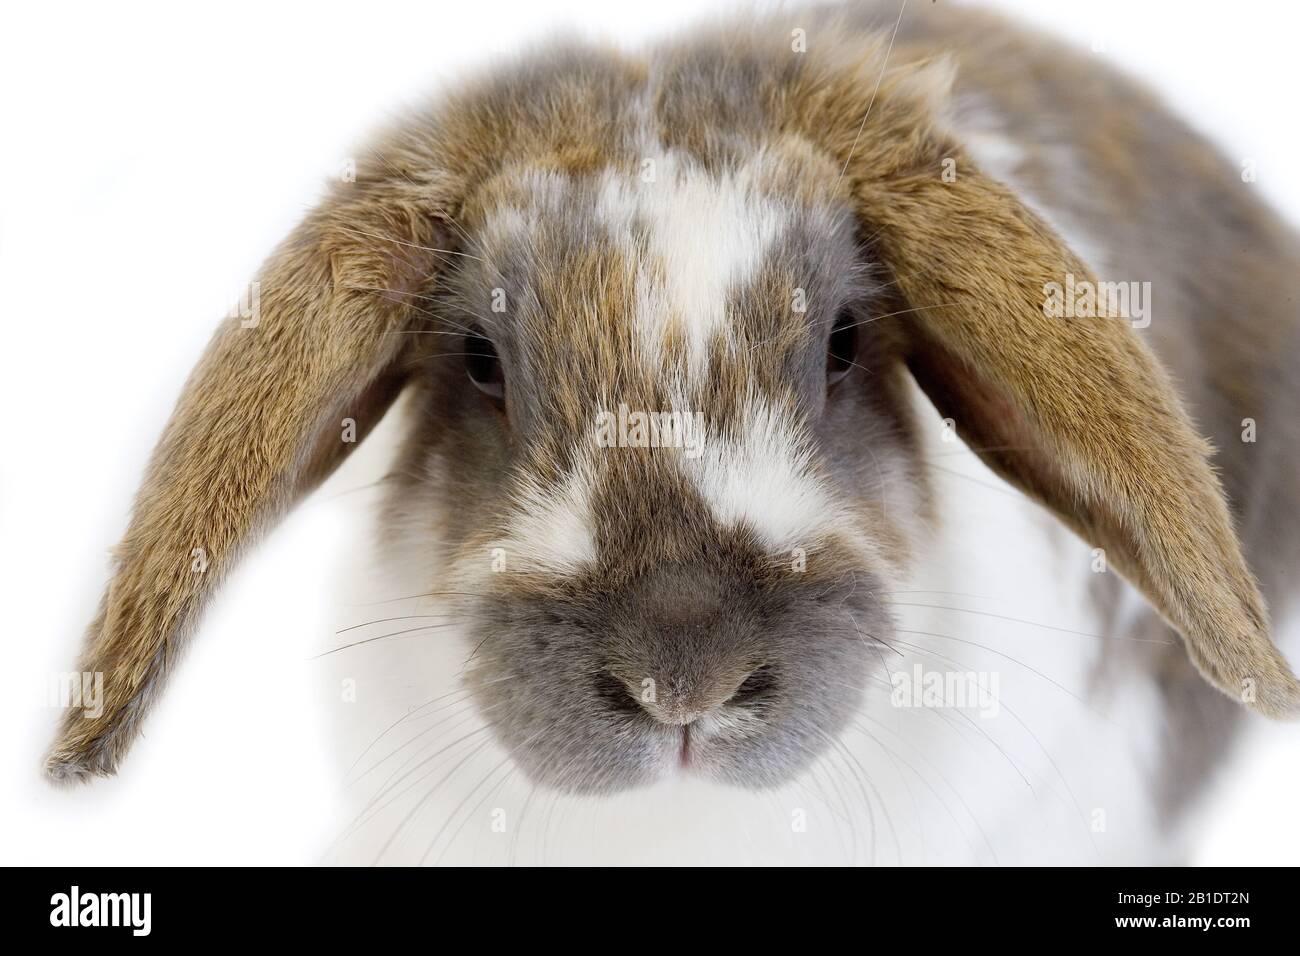 Lop-Eared Domestic Rabbit, Adult against White Background Stock Photo